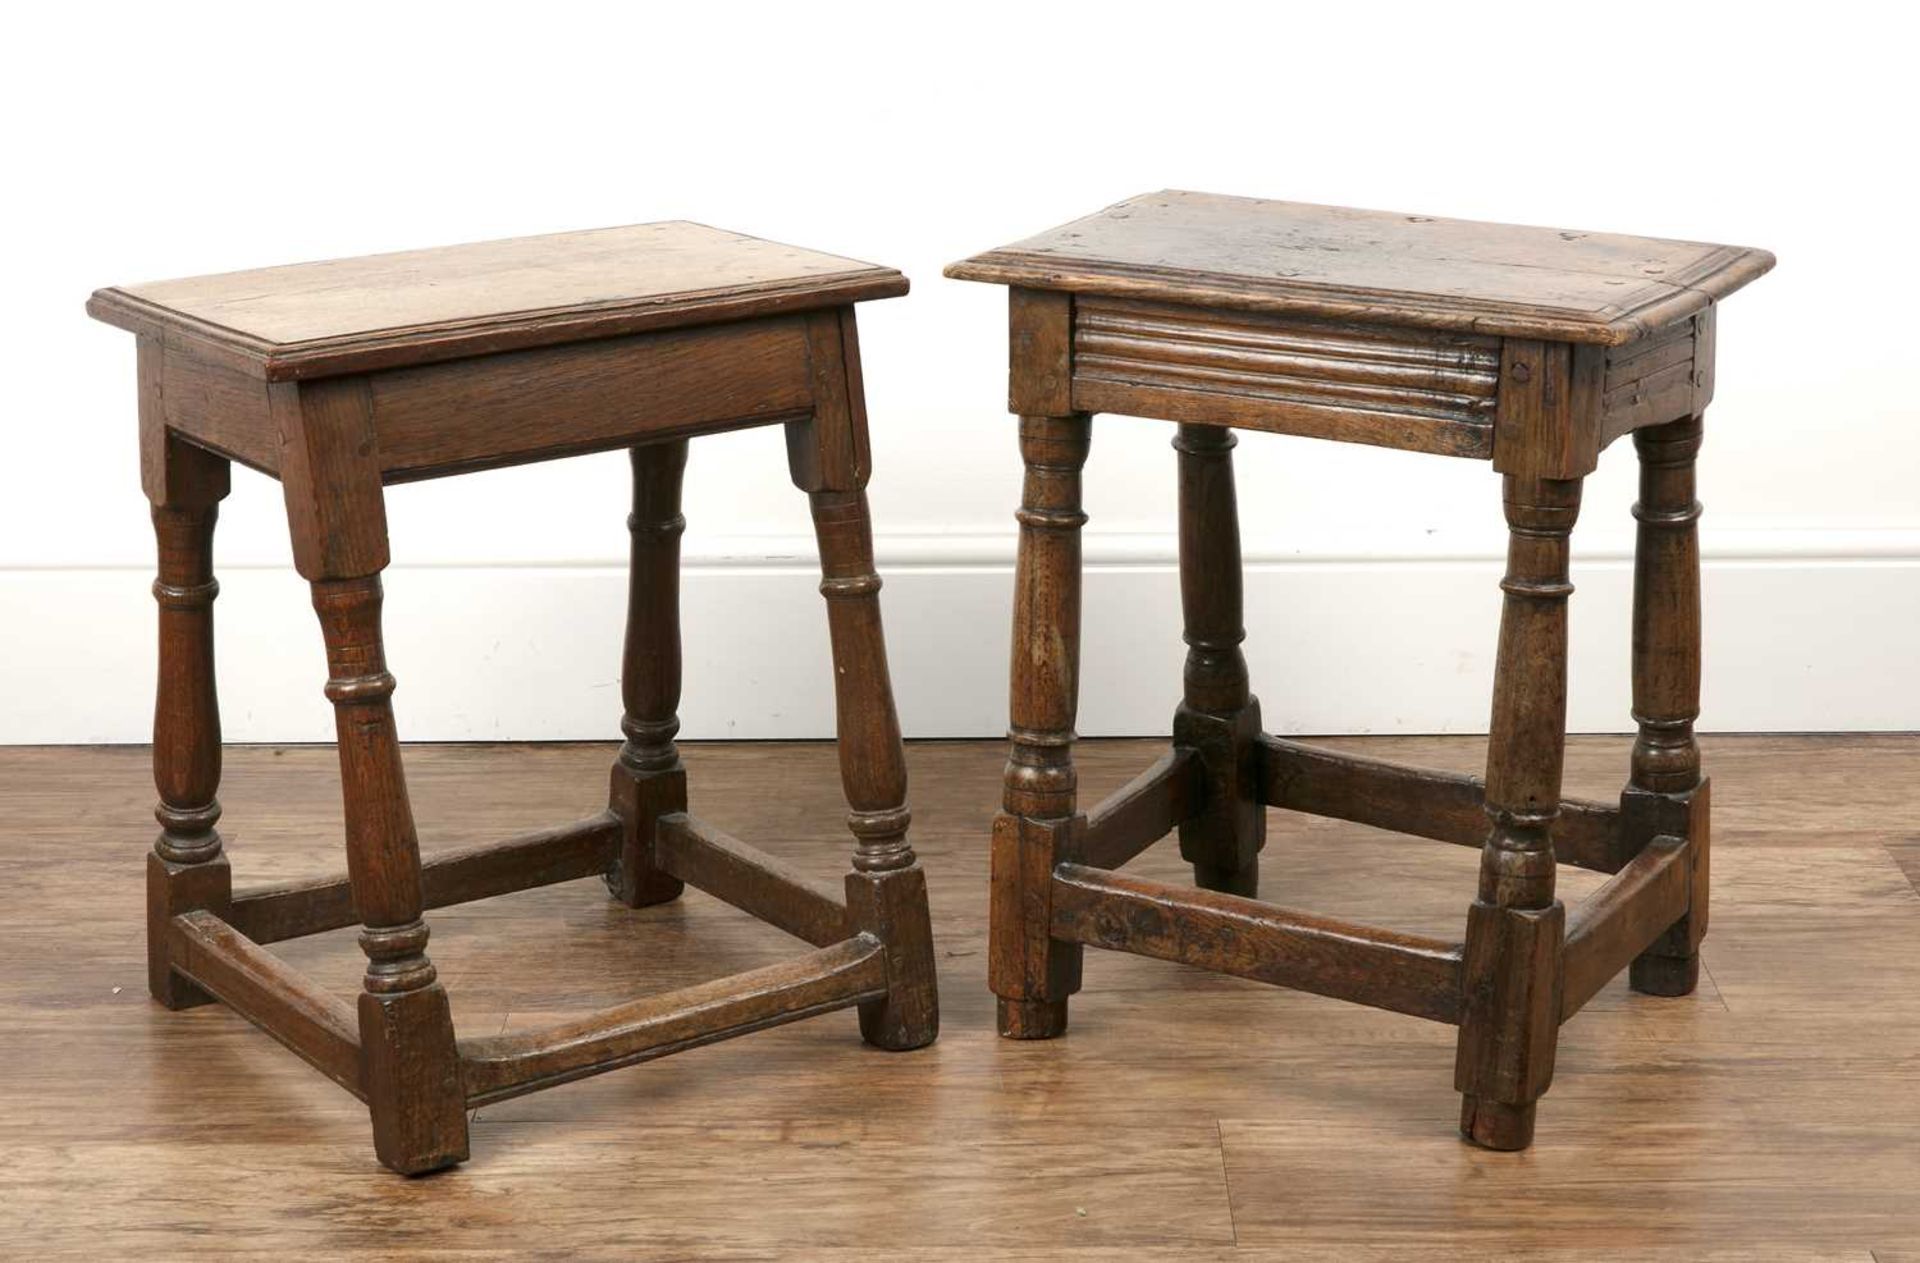 Two oak joint stools 18th Century and later, the larger example measures 44cm x 27.5cm x 51.5cm, the - Image 2 of 5